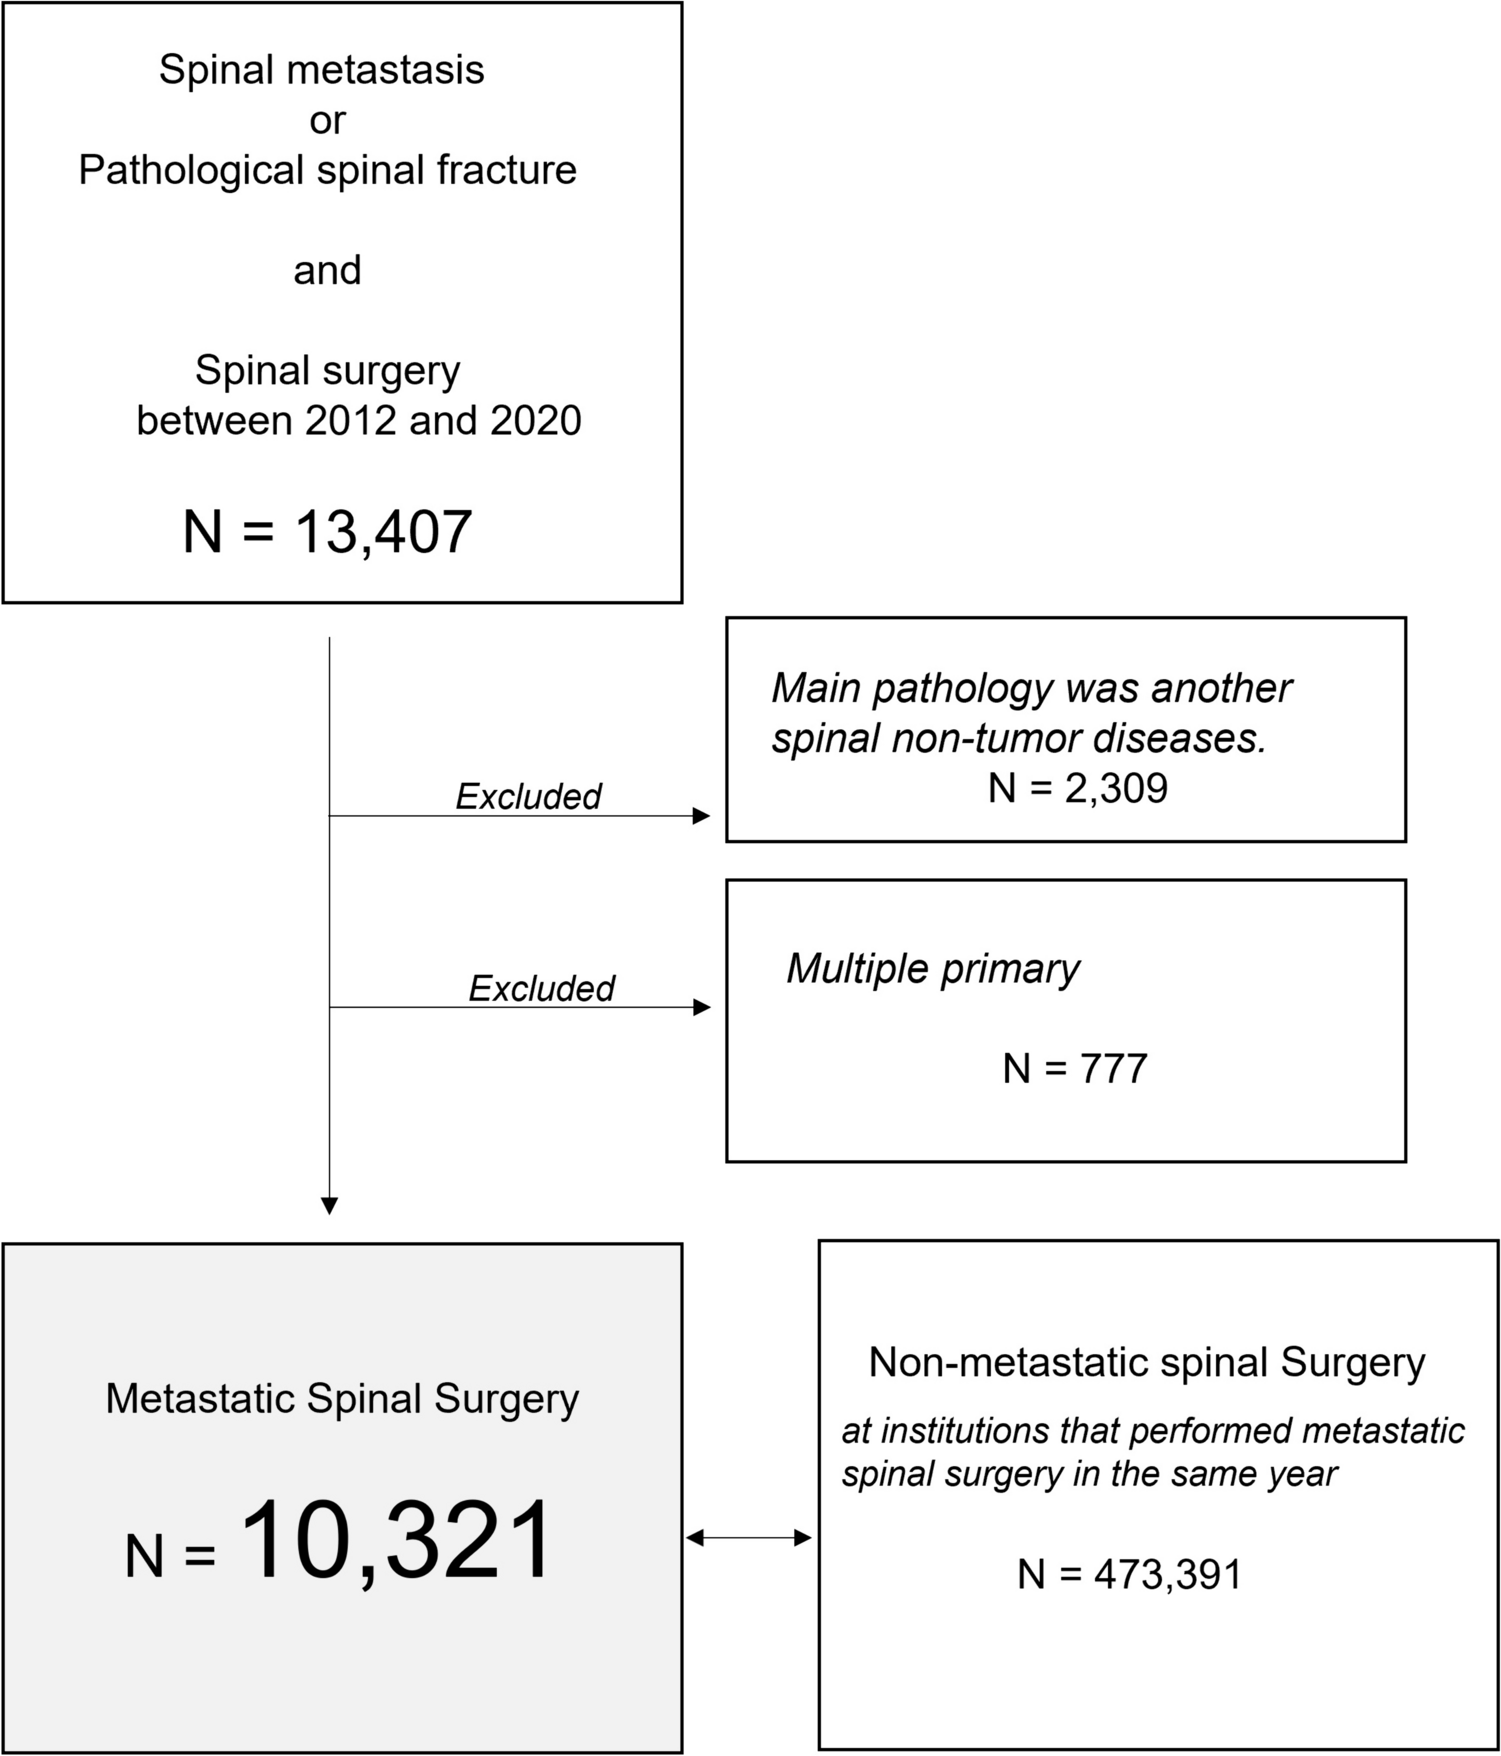 Trends in the surgical treatment for metastatic spinal tumor in Japanese administrative data between 2012 and 2020